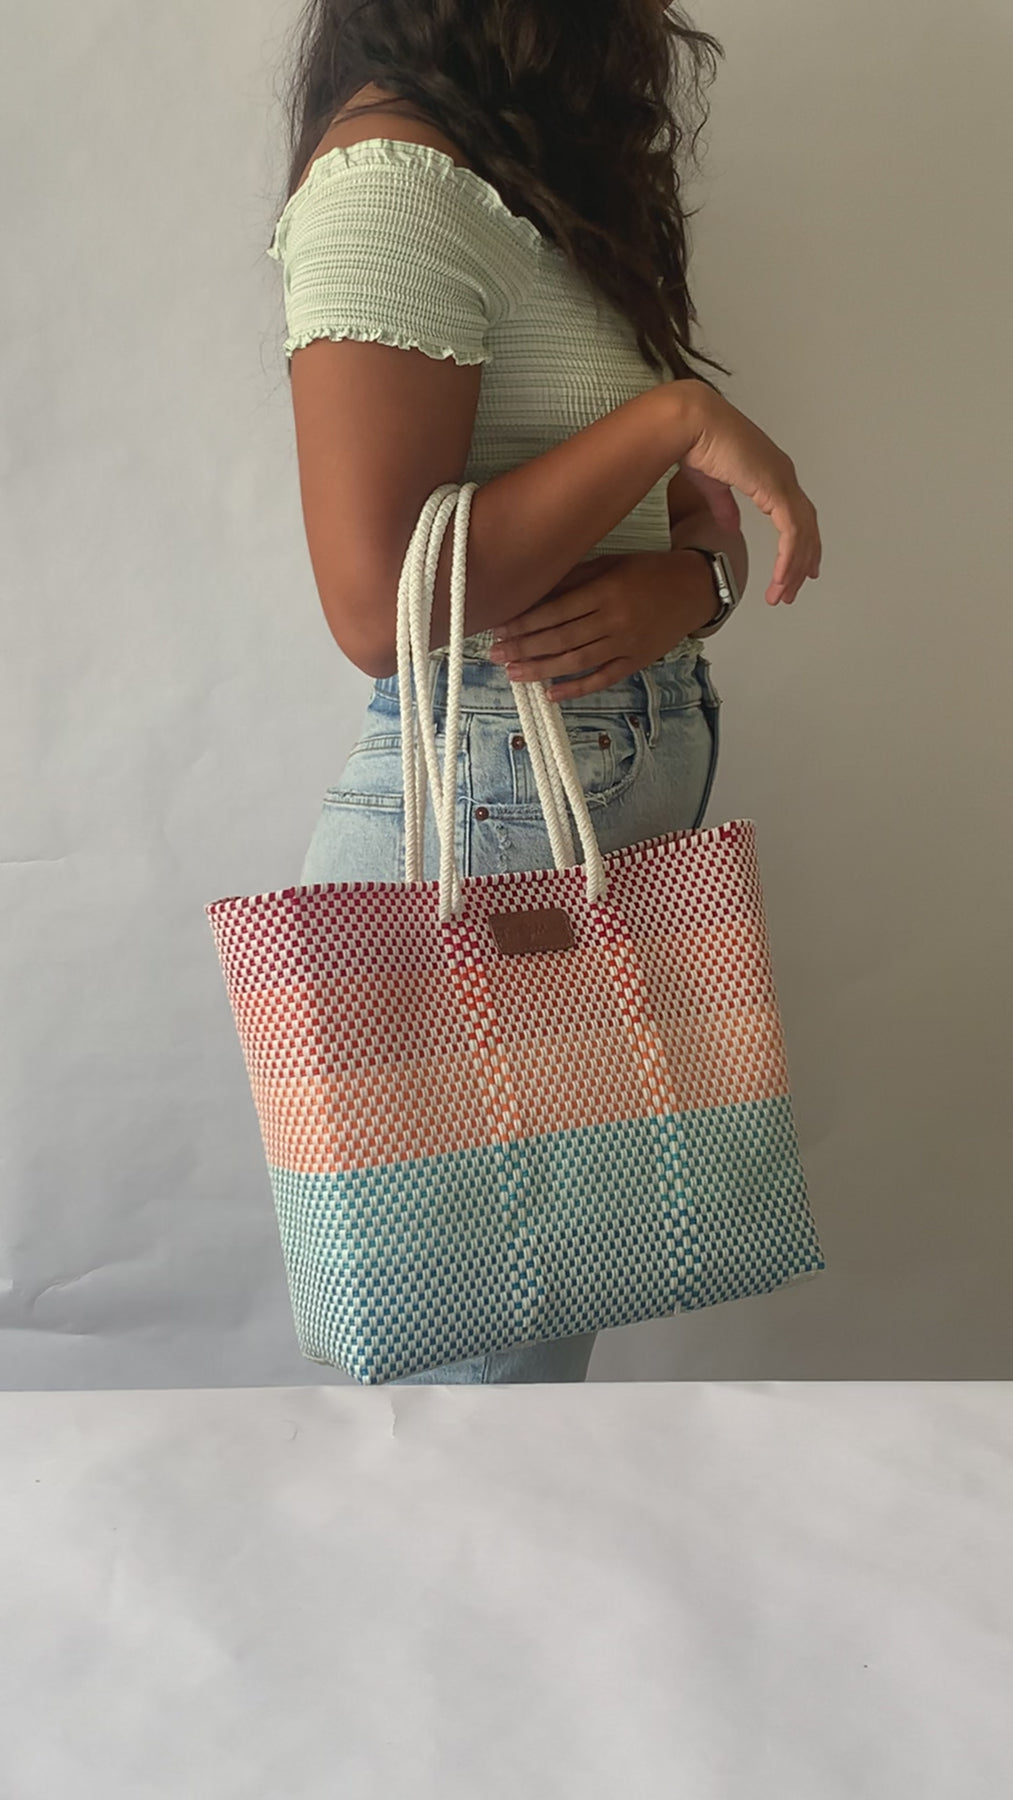  Mixte Woven Super Tote, Handwoven Recycled Plastic Tote,  Mexican Woven Bag, Beach Bag, Summer Bag, Blue & Beige Beach Bag,  Water-Resistant Tote : Handmade Products